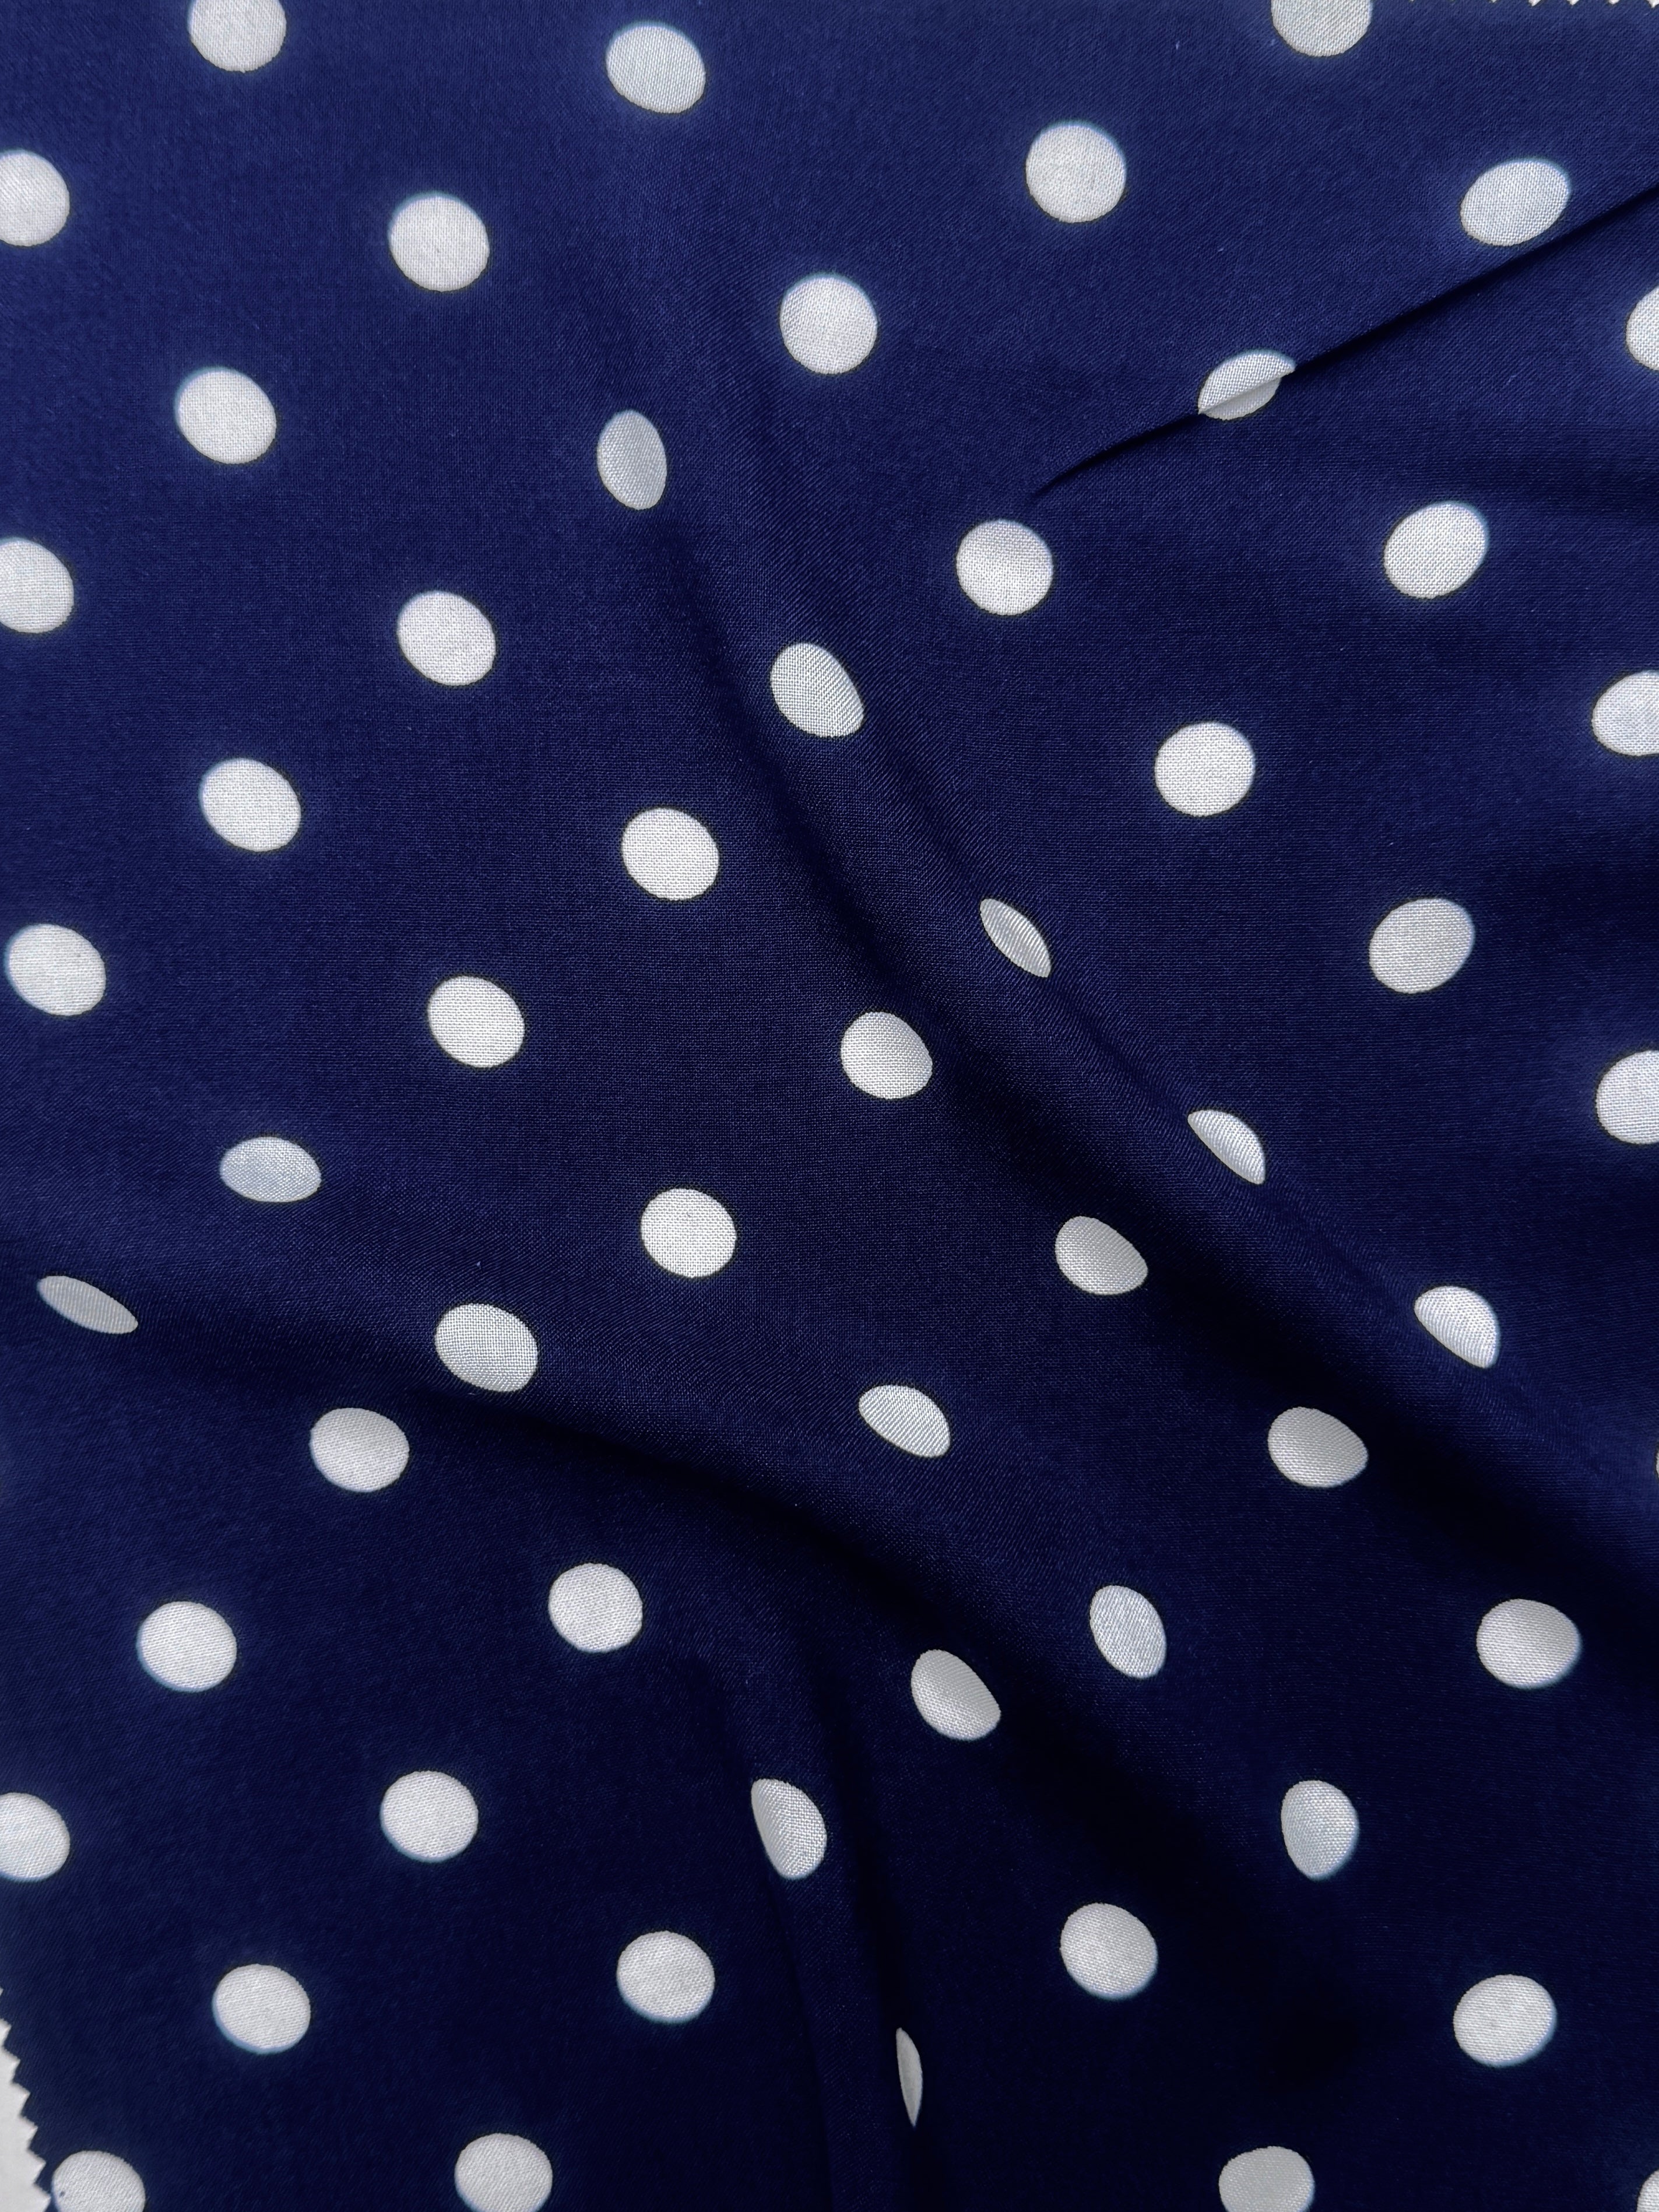 Navy Polka dots on White Rayon Challis, online textile store, sewing, fabric store, sewing store, cheap fabric store, kiki textiles